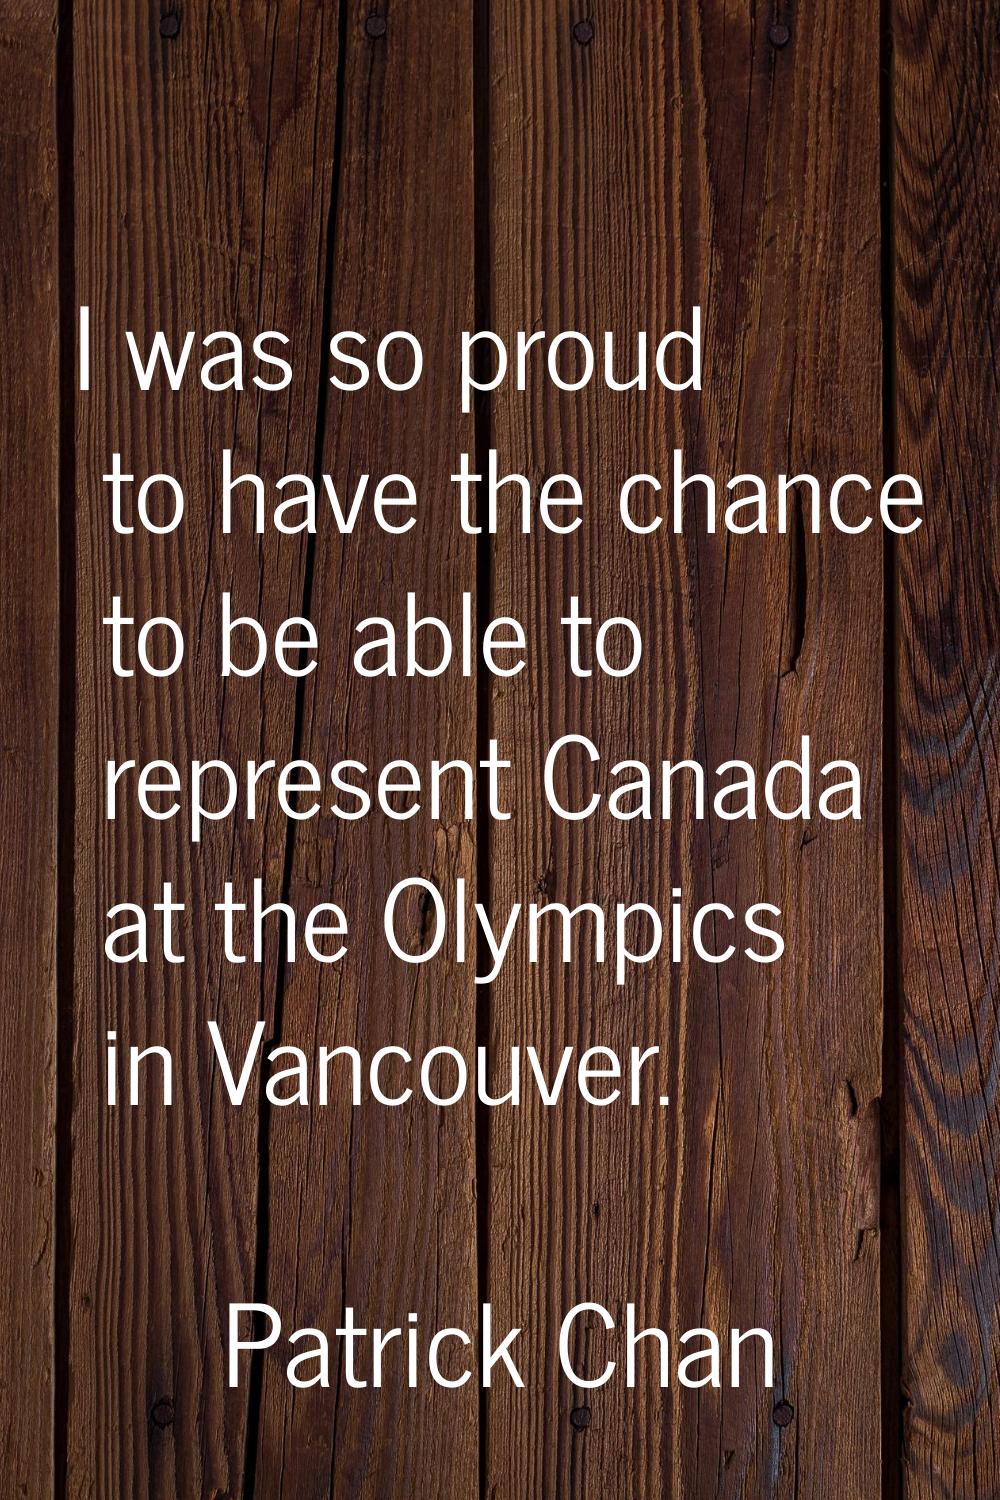 I was so proud to have the chance to be able to represent Canada at the Olympics in Vancouver.